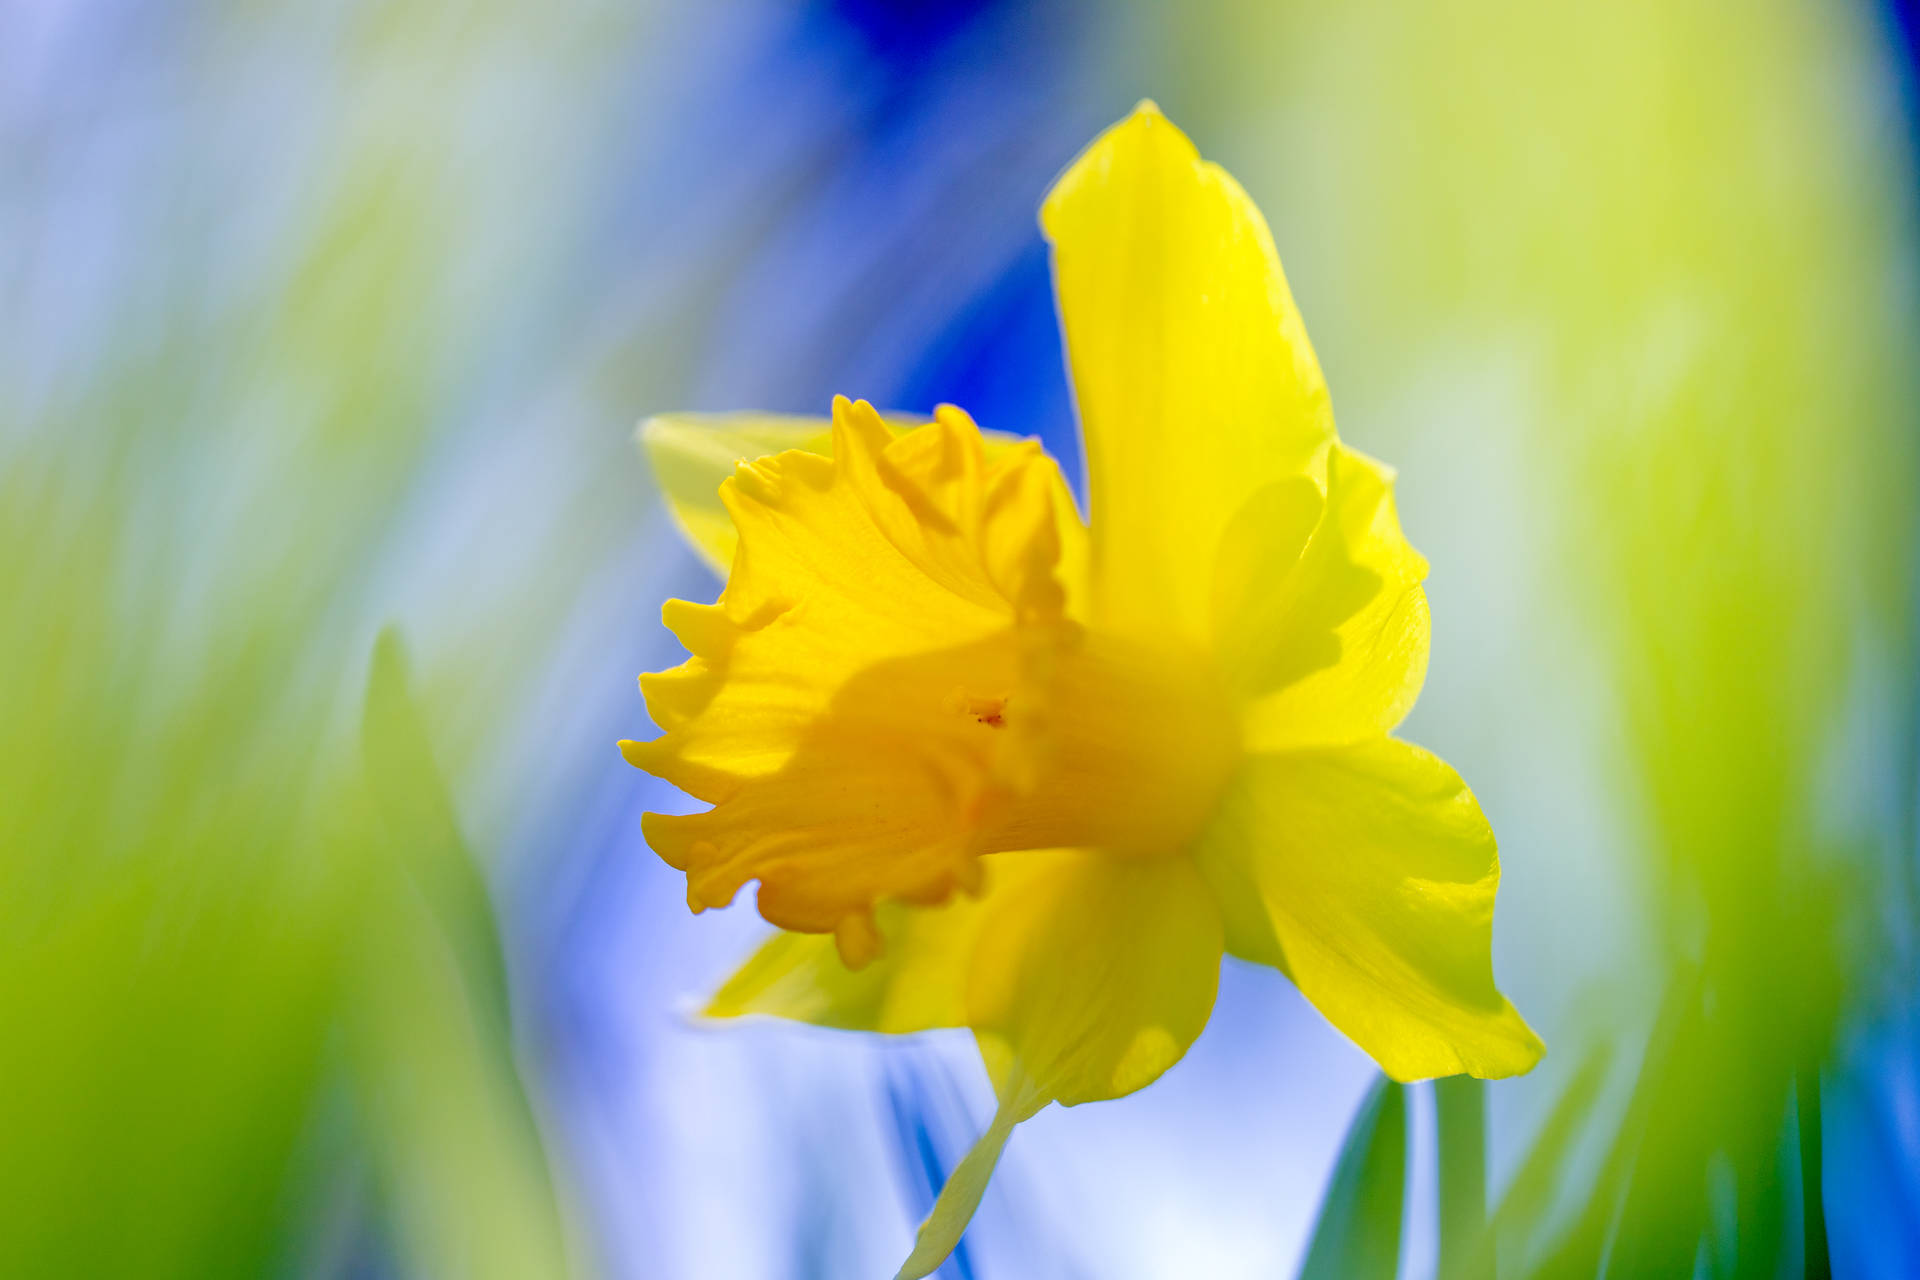 Daffodil 6240X4160 Wallpaper and Background Image